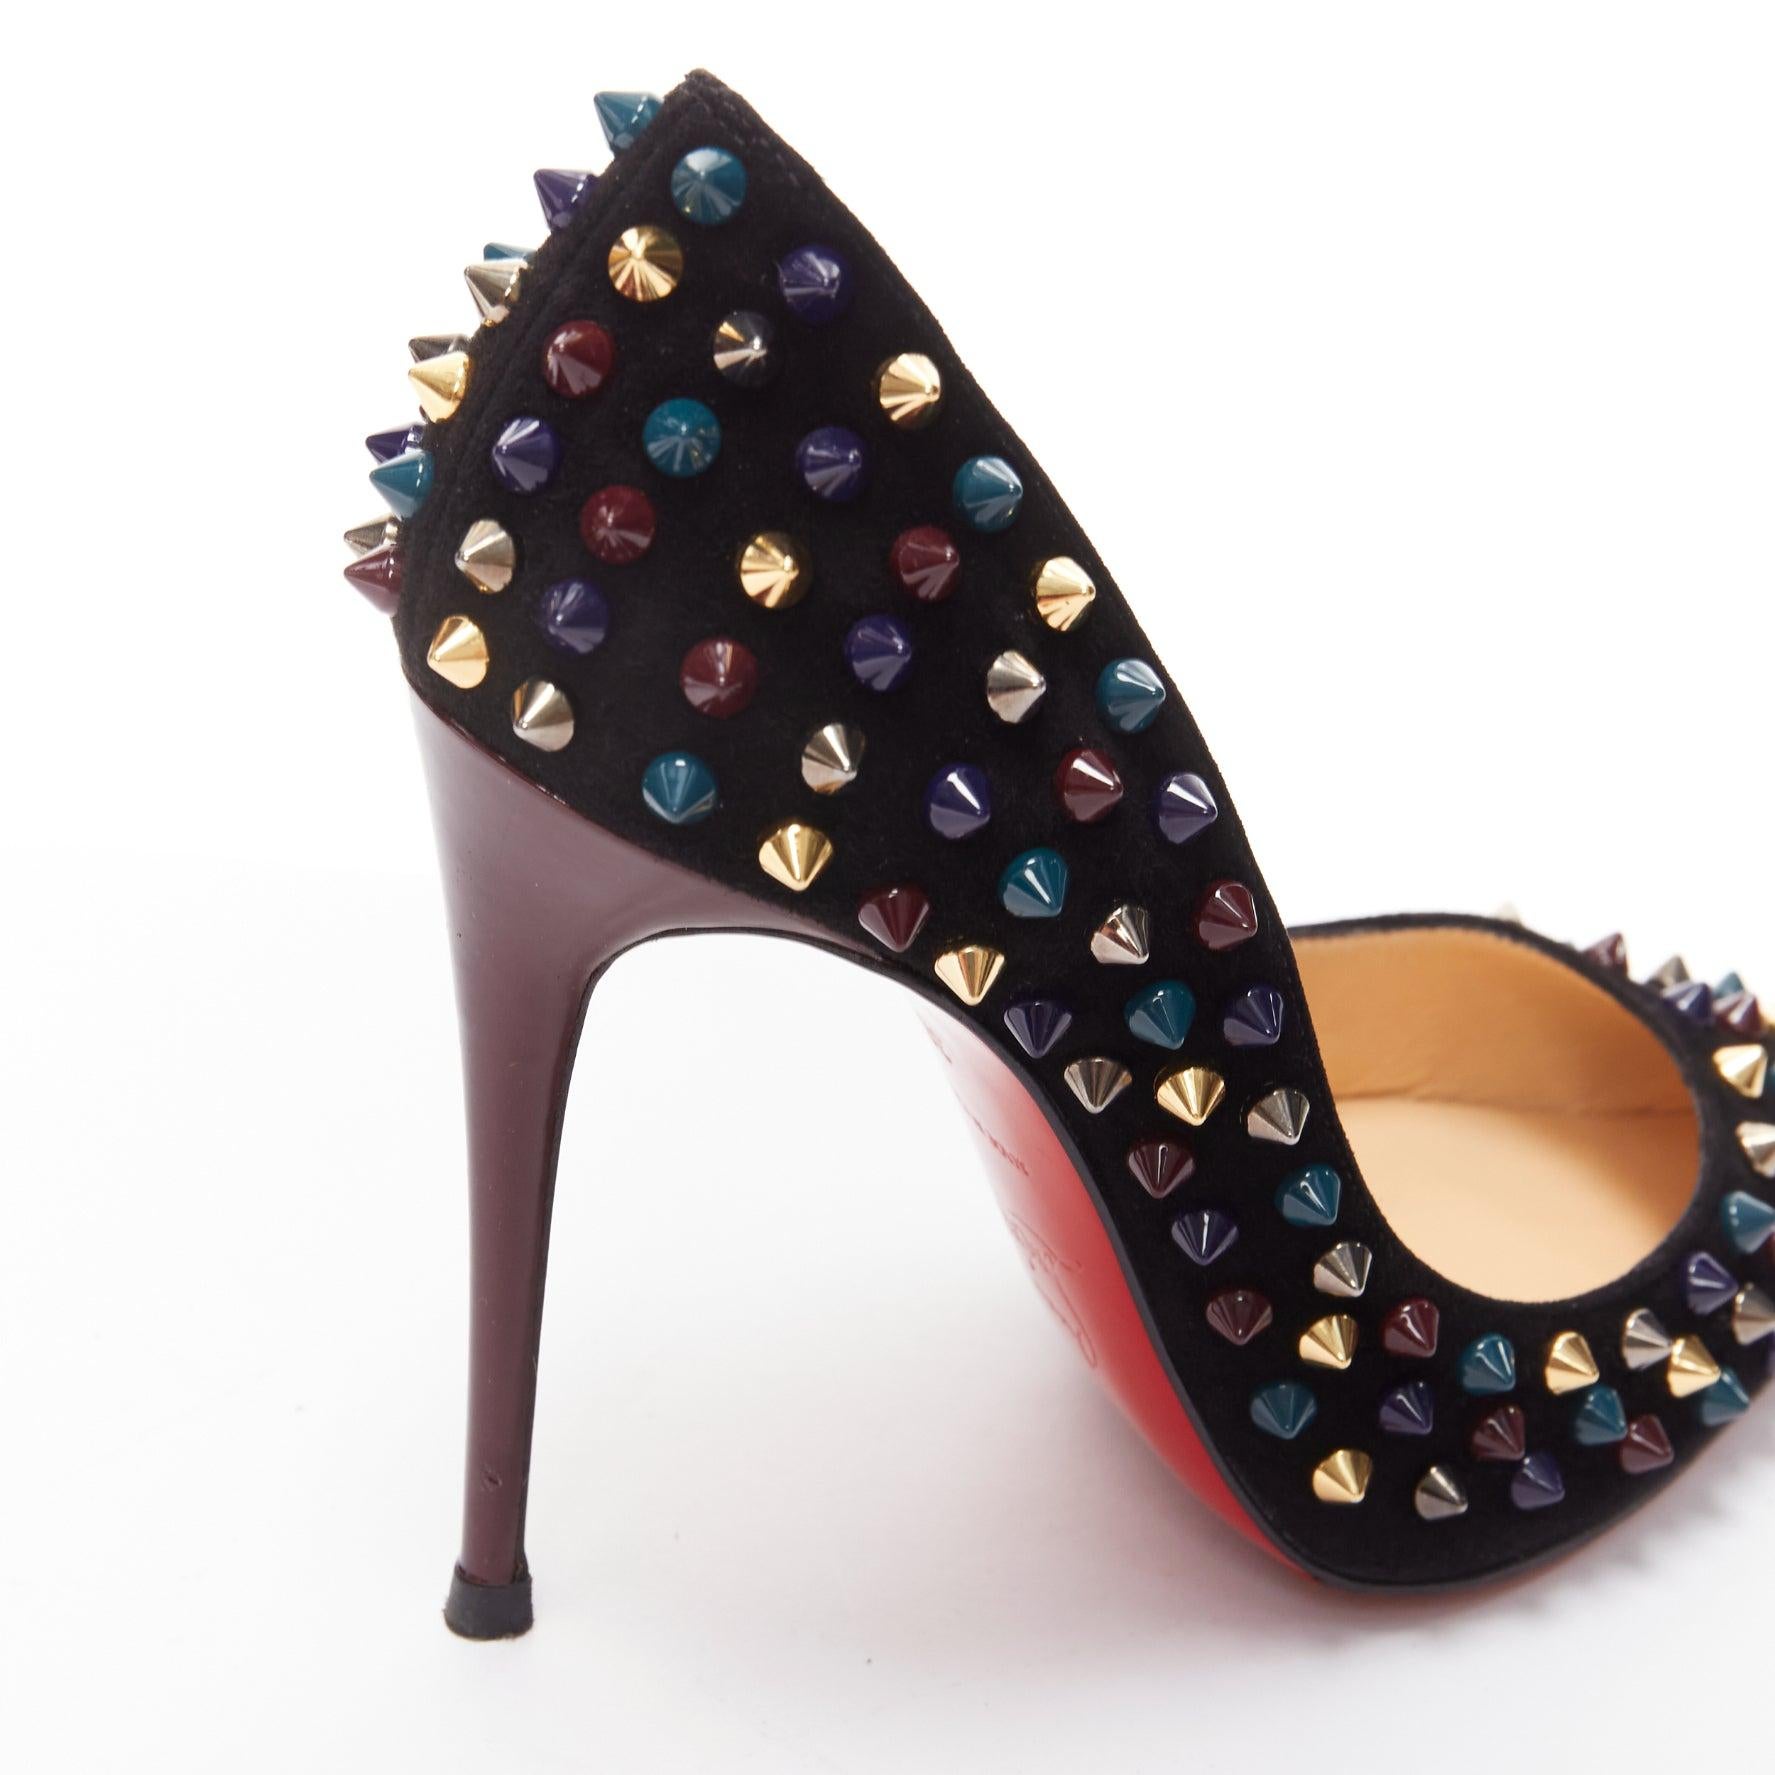 CHRISITAN LOUBOUTI Follies Spikes black suede jewely tone spike pigalle EU36 For Sale 4